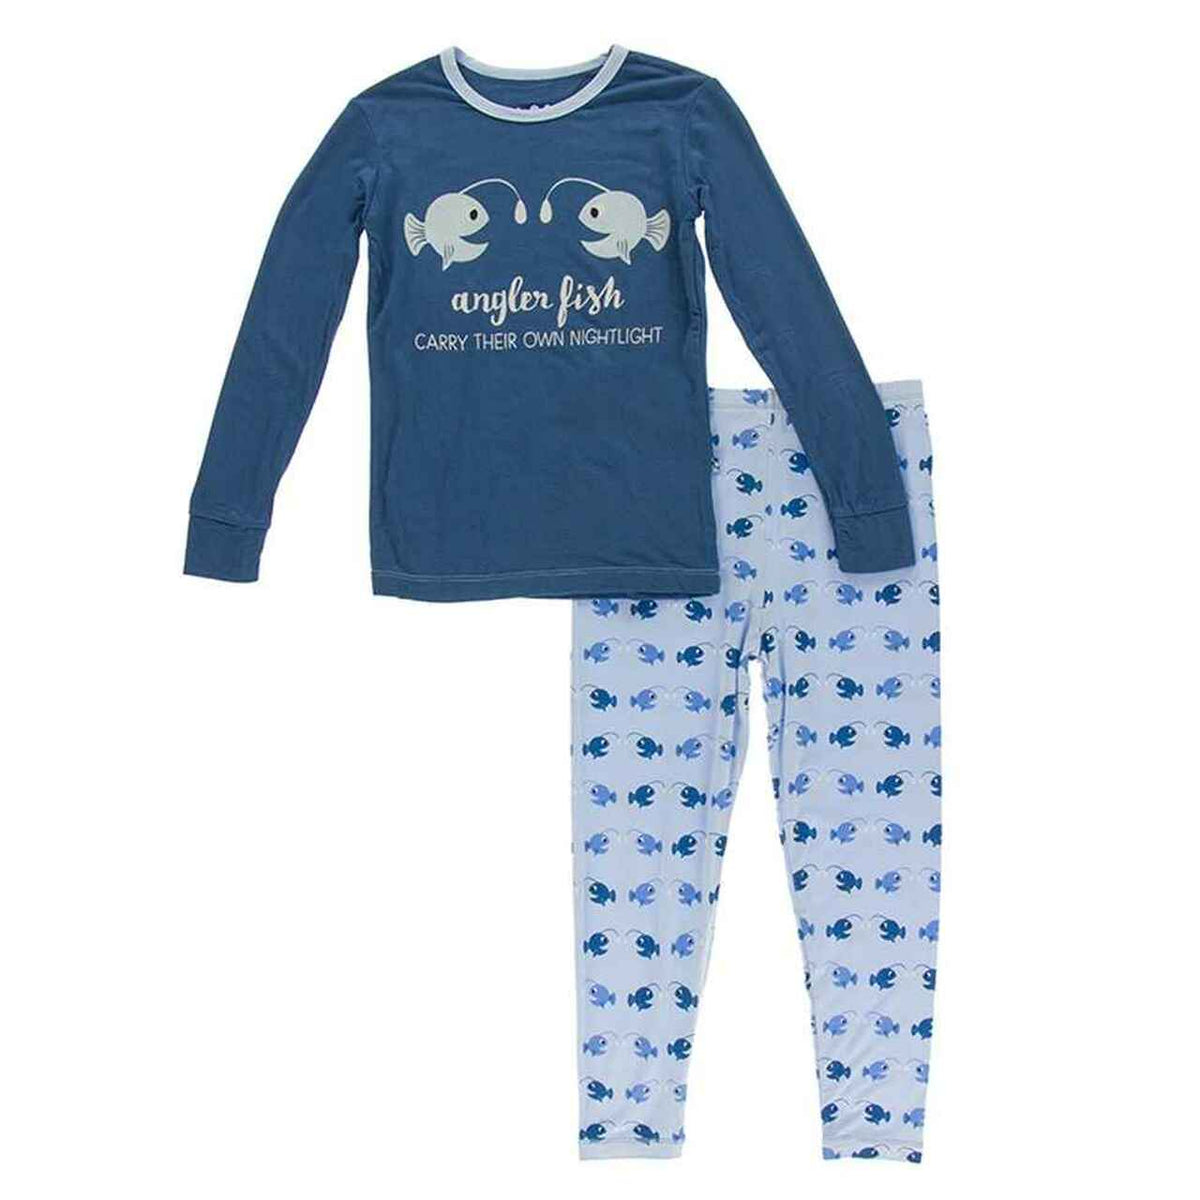 WEB ONLY - KwikSew K3589 Kids Sleep Pants and Shorts - Sizes 6-10 Paper  Pattern